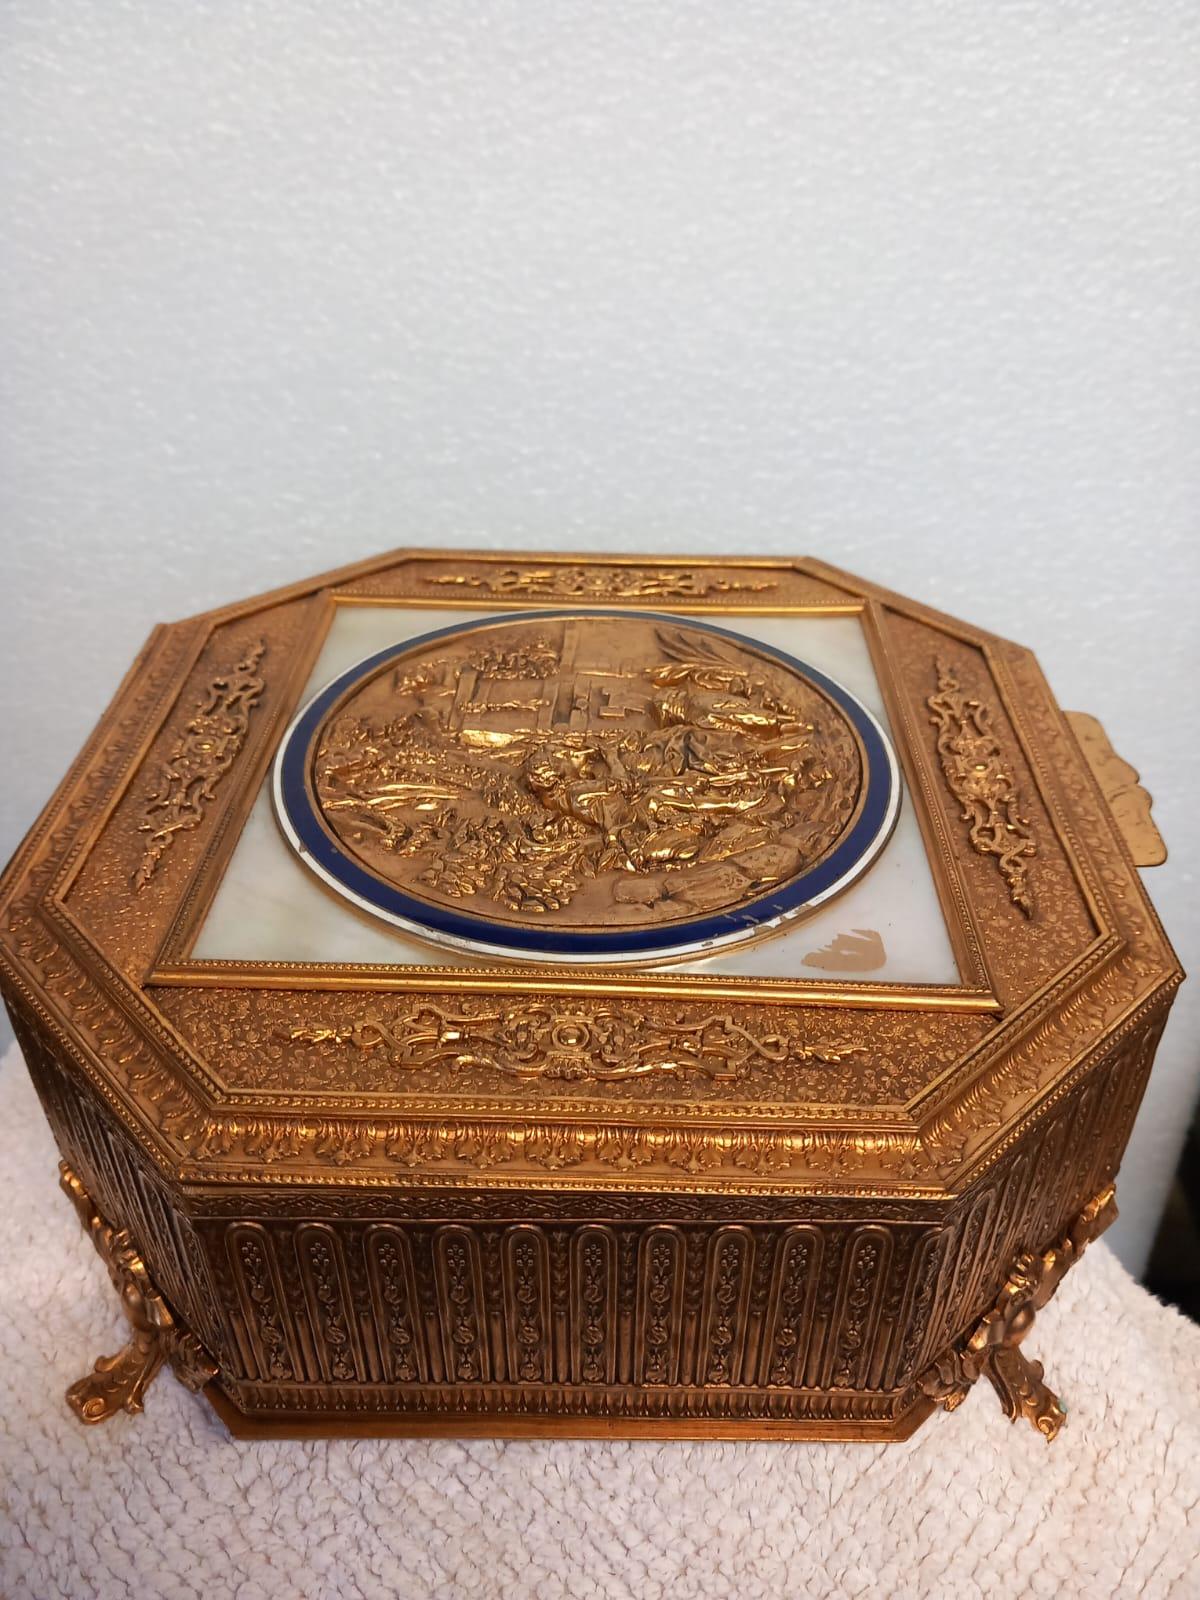 A very good quality and unusual Palais Royal gilt bronze and mother of pearl jewellery casket or trinket box dating from the first quarter of the nineteenth century. 
The box is in gilded bronze with a repoussé allegorical cartouches of a man